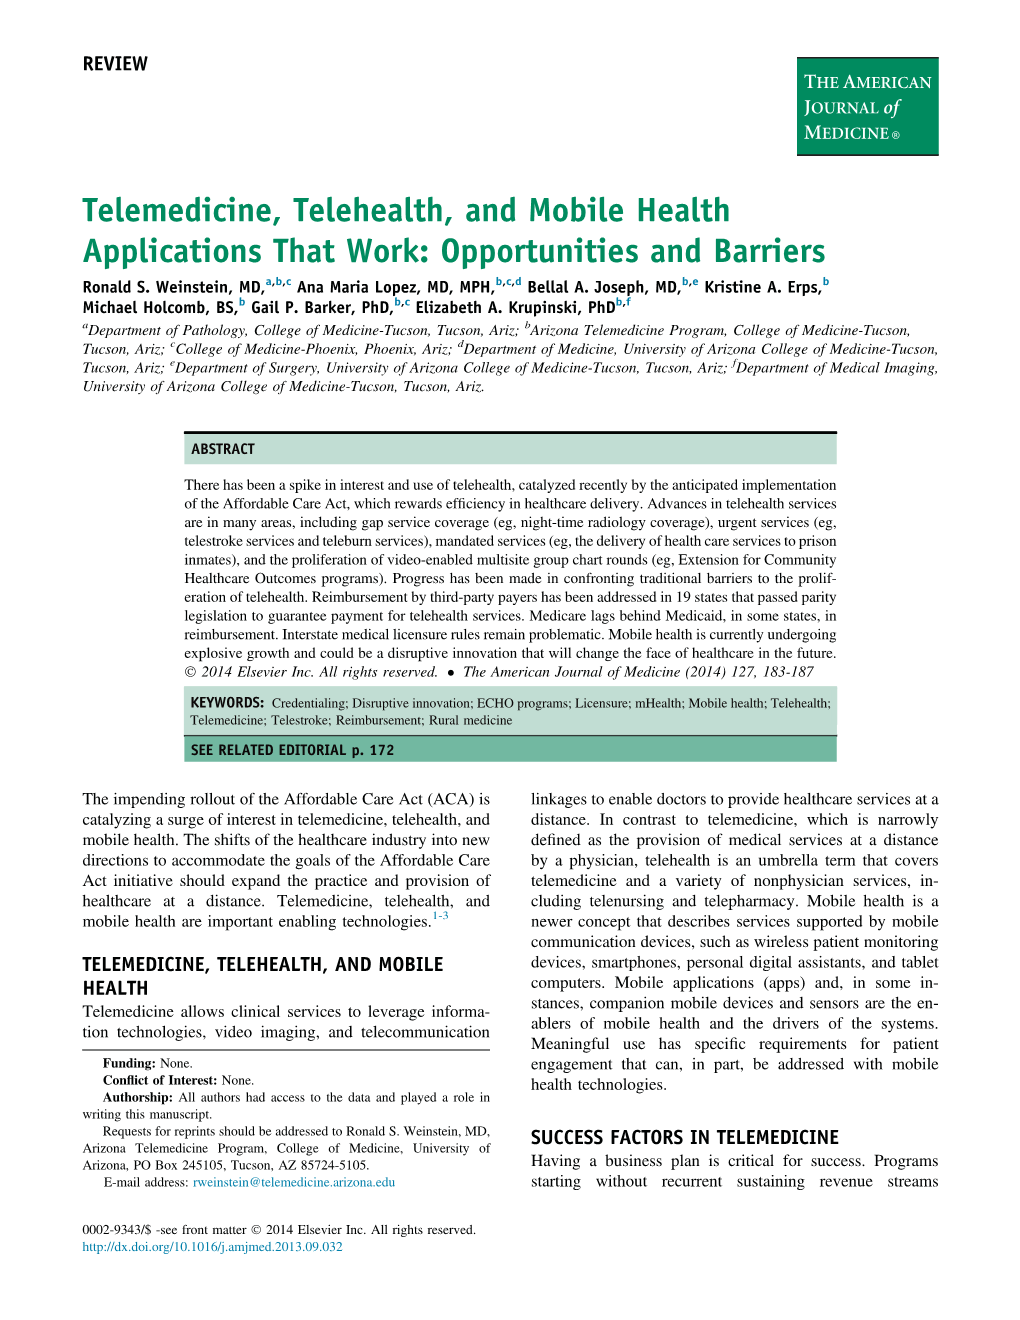 Telemedicine, Telehealth, and Mobile Health Applications That Work: Opportunities and Barriers Ronald S